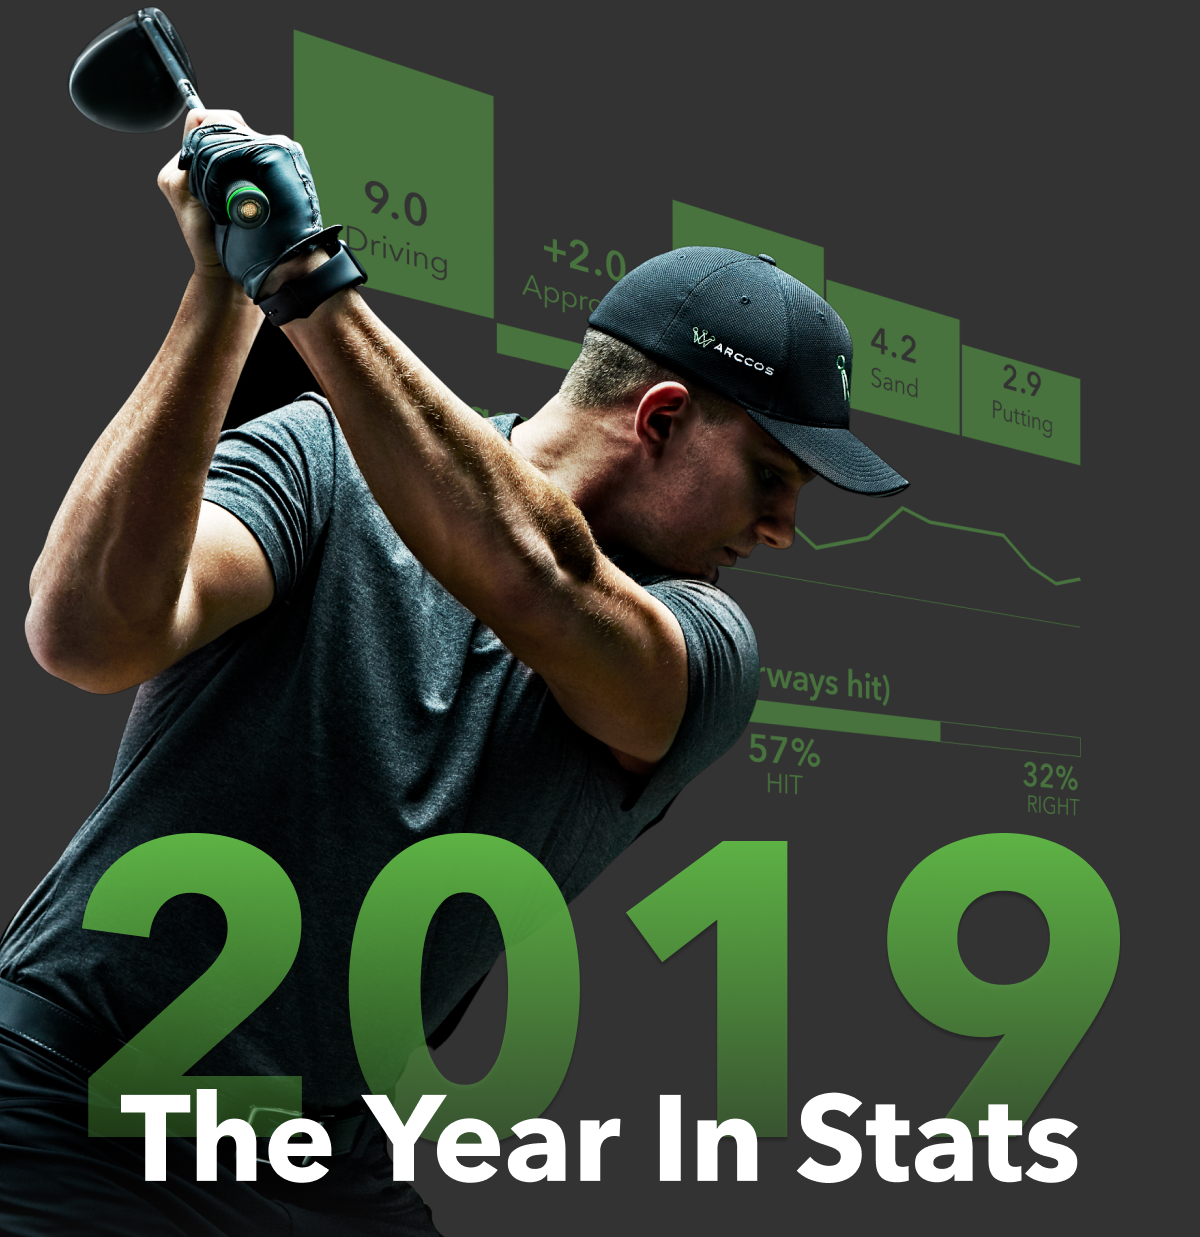 Arccos 2019 - The Year In Stats